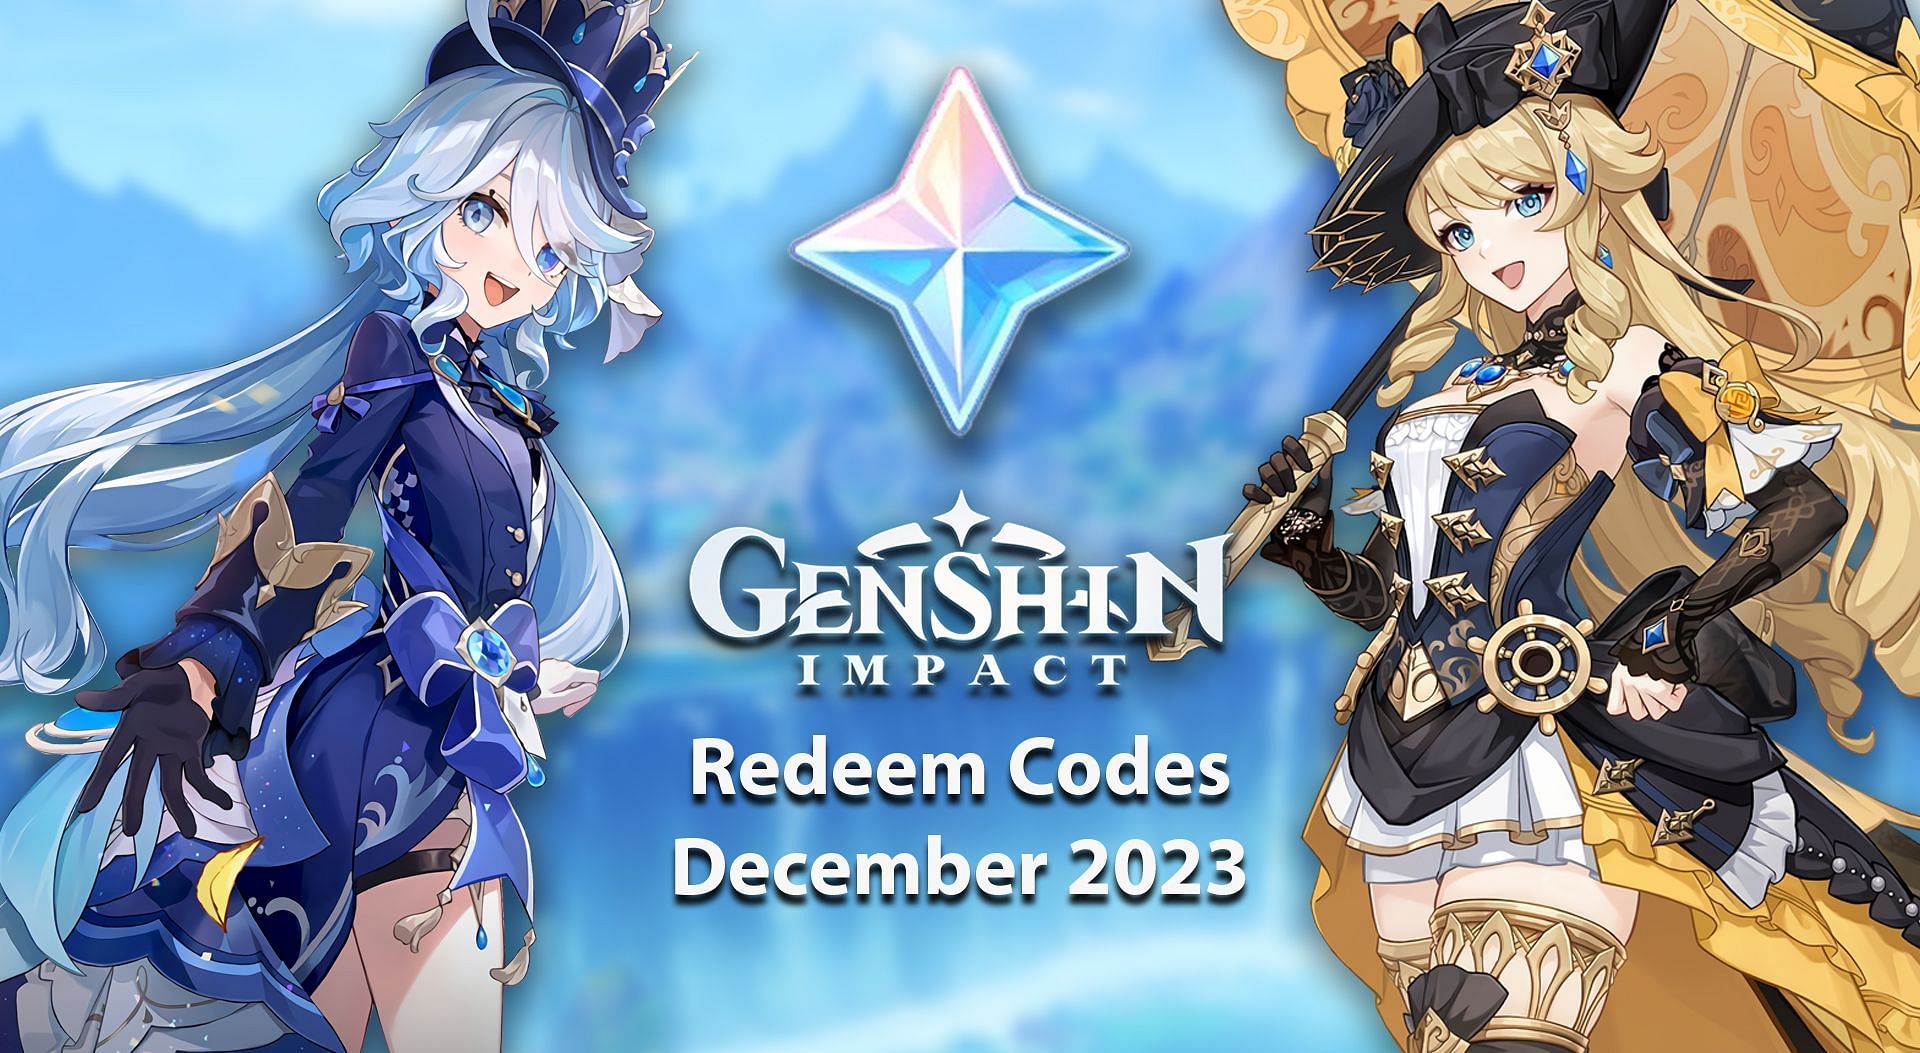 Latest Genshin Impact Codes December 2023 - The Game Statistics Authority 